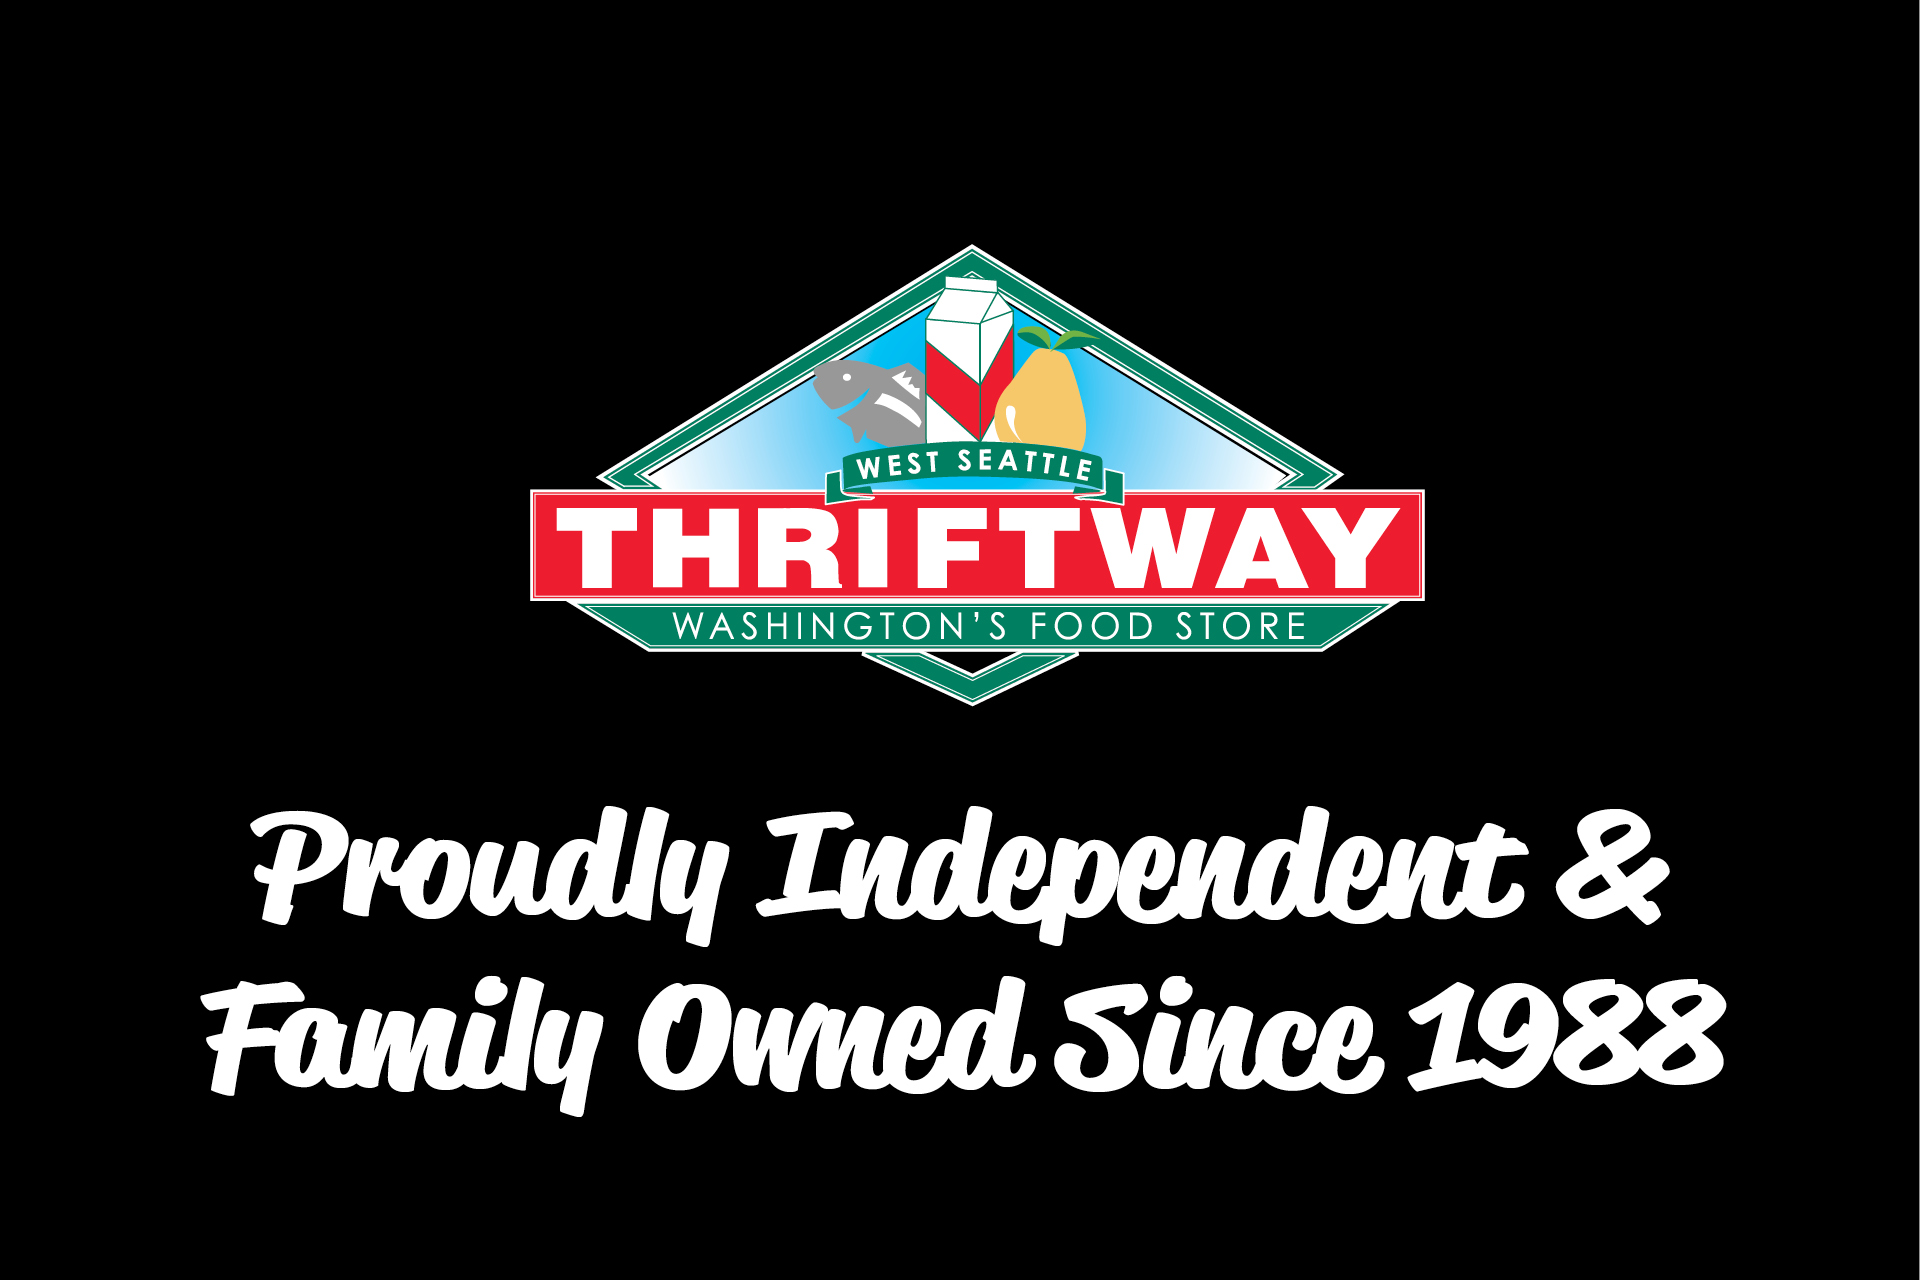 West Seattle Thriftway! Locally Owned and Operated Since 1988